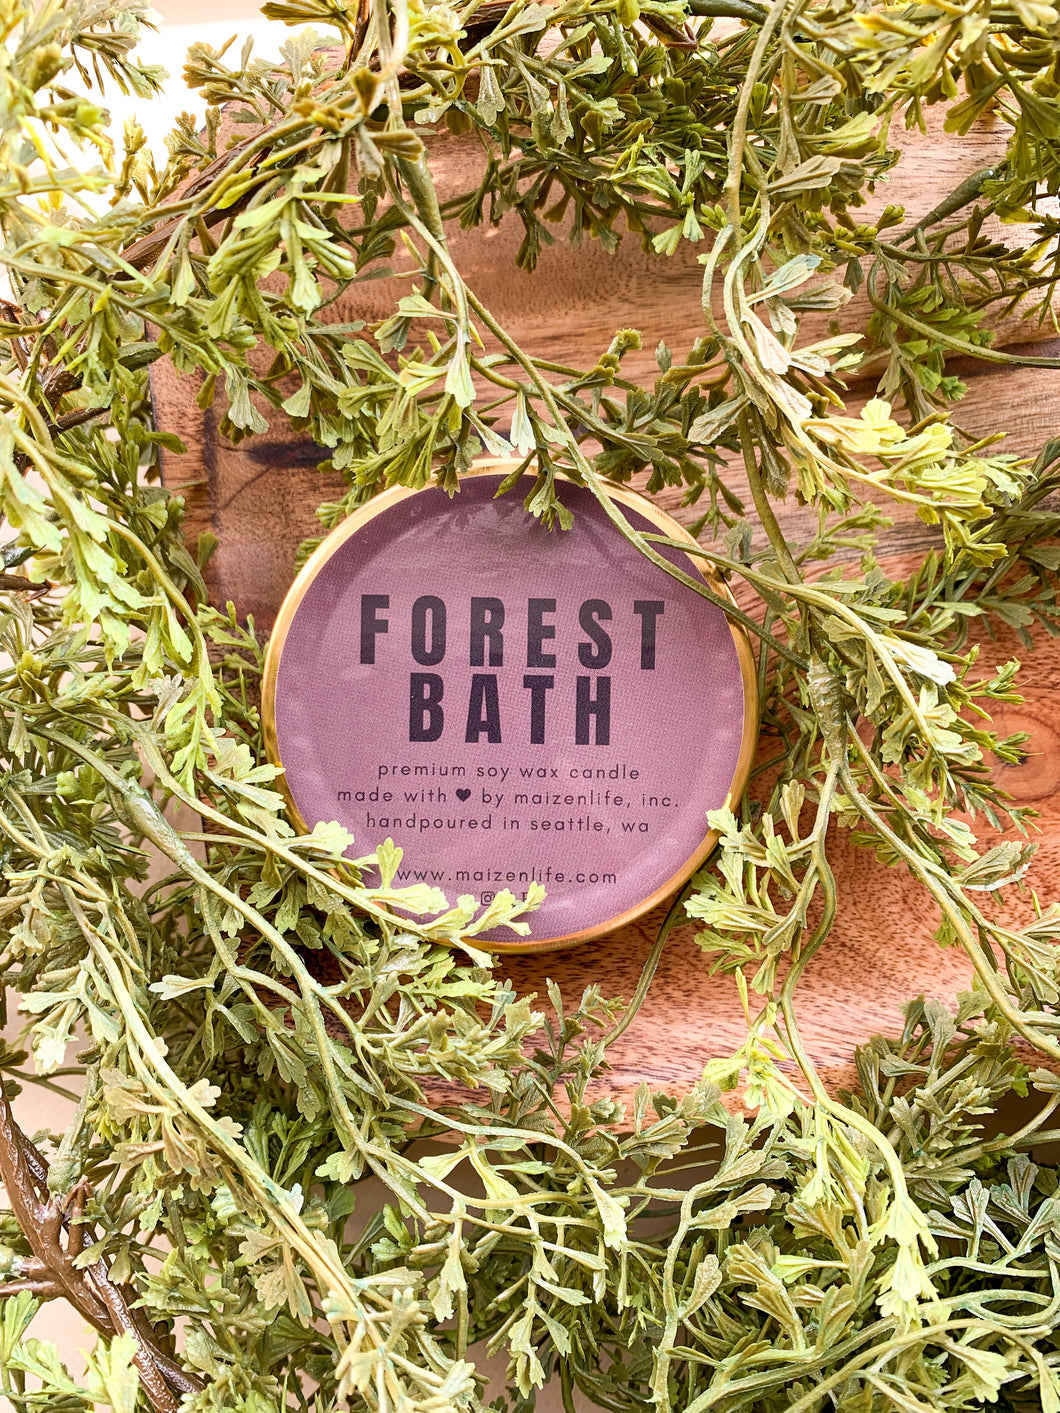 FOREST BATH - asian inspired soy wax scented candle: woody musky scented candle